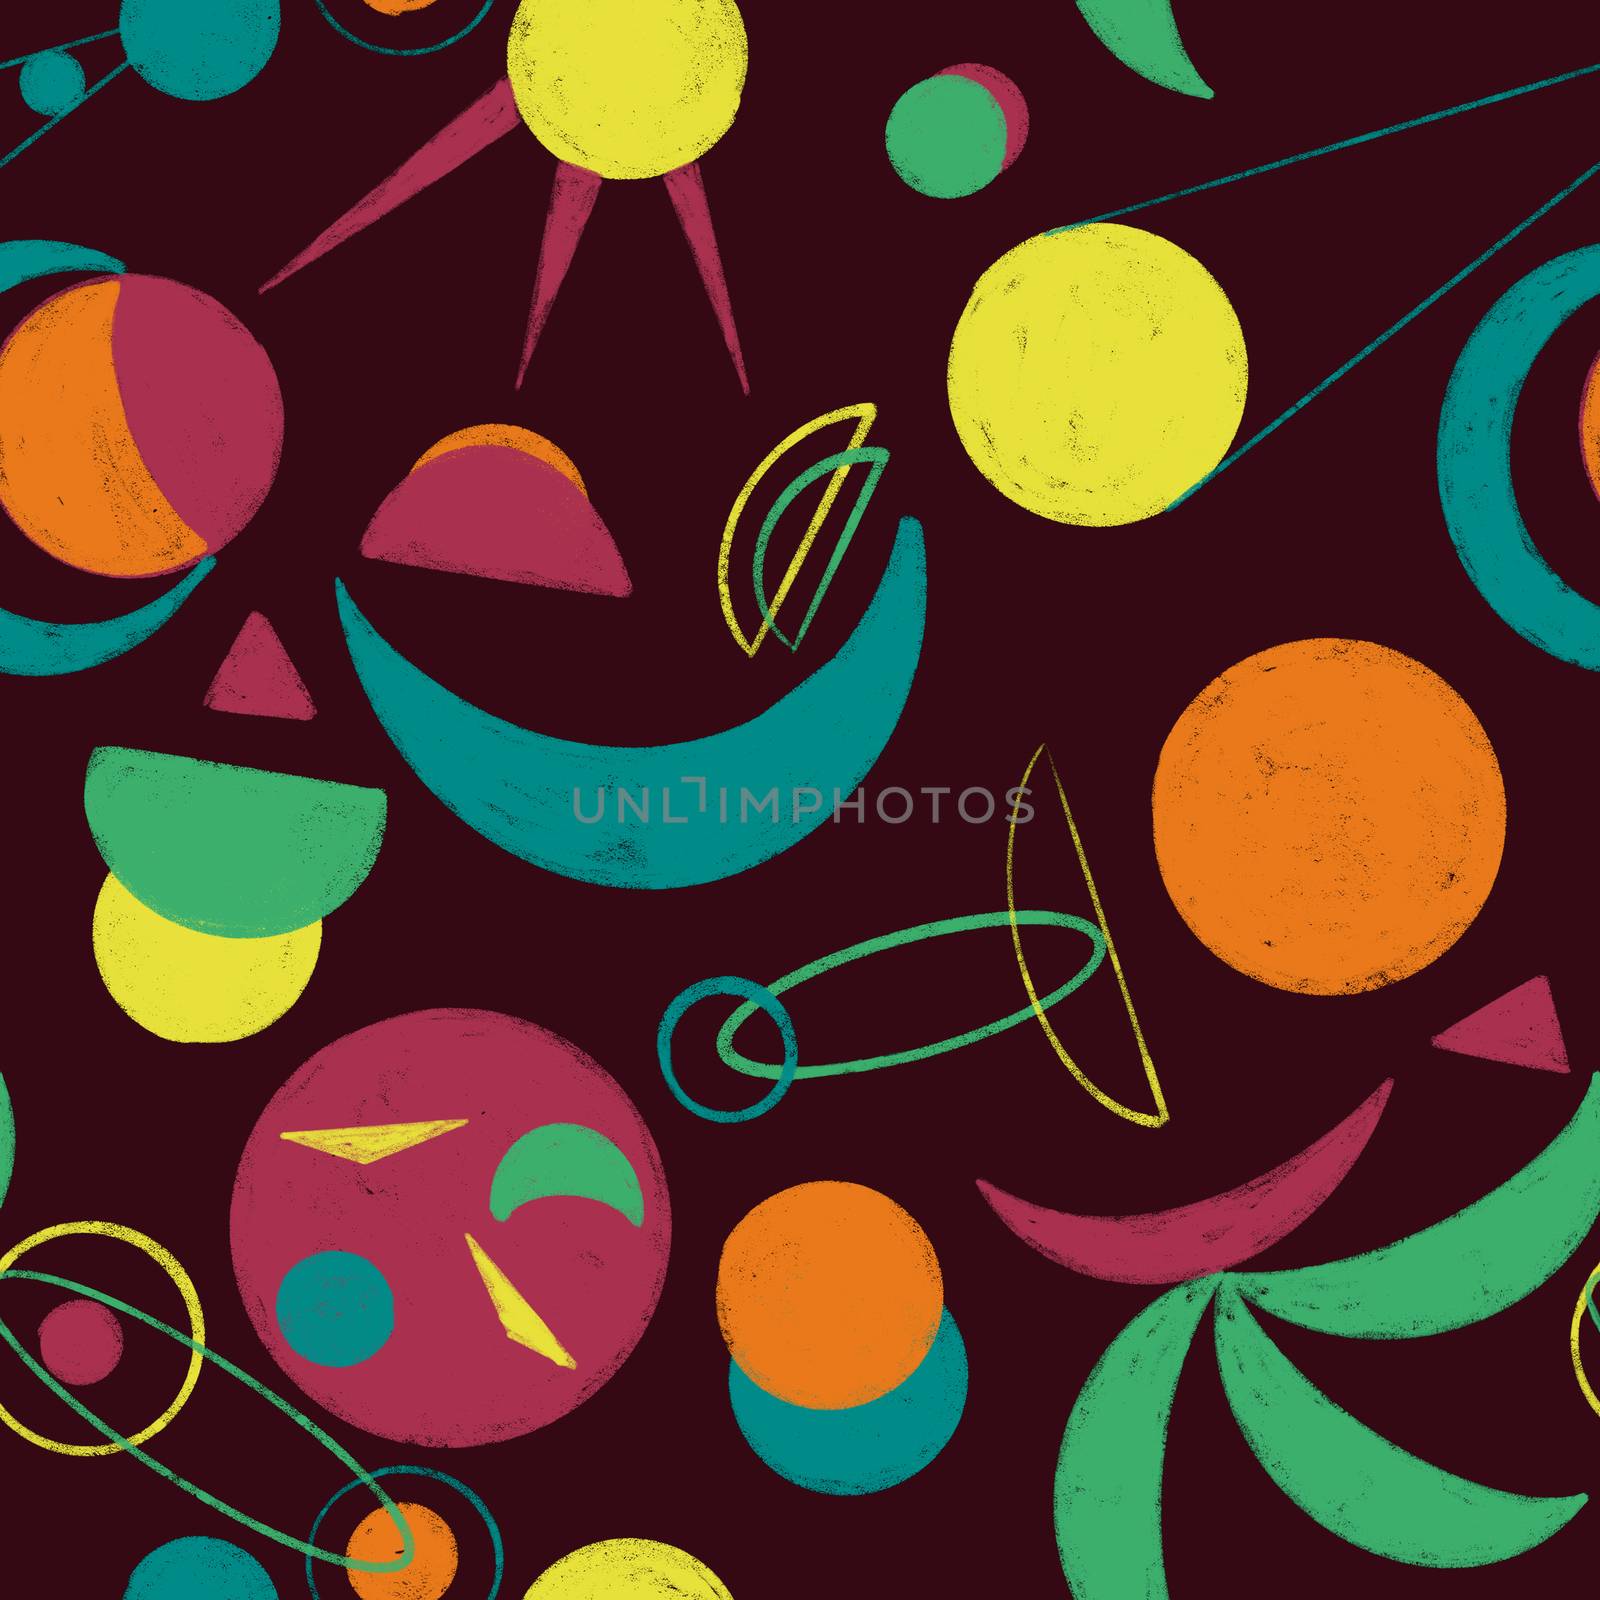 Moon, stars and planets bright abstract texture doodle geometric seamless background. Endless illustration template design.